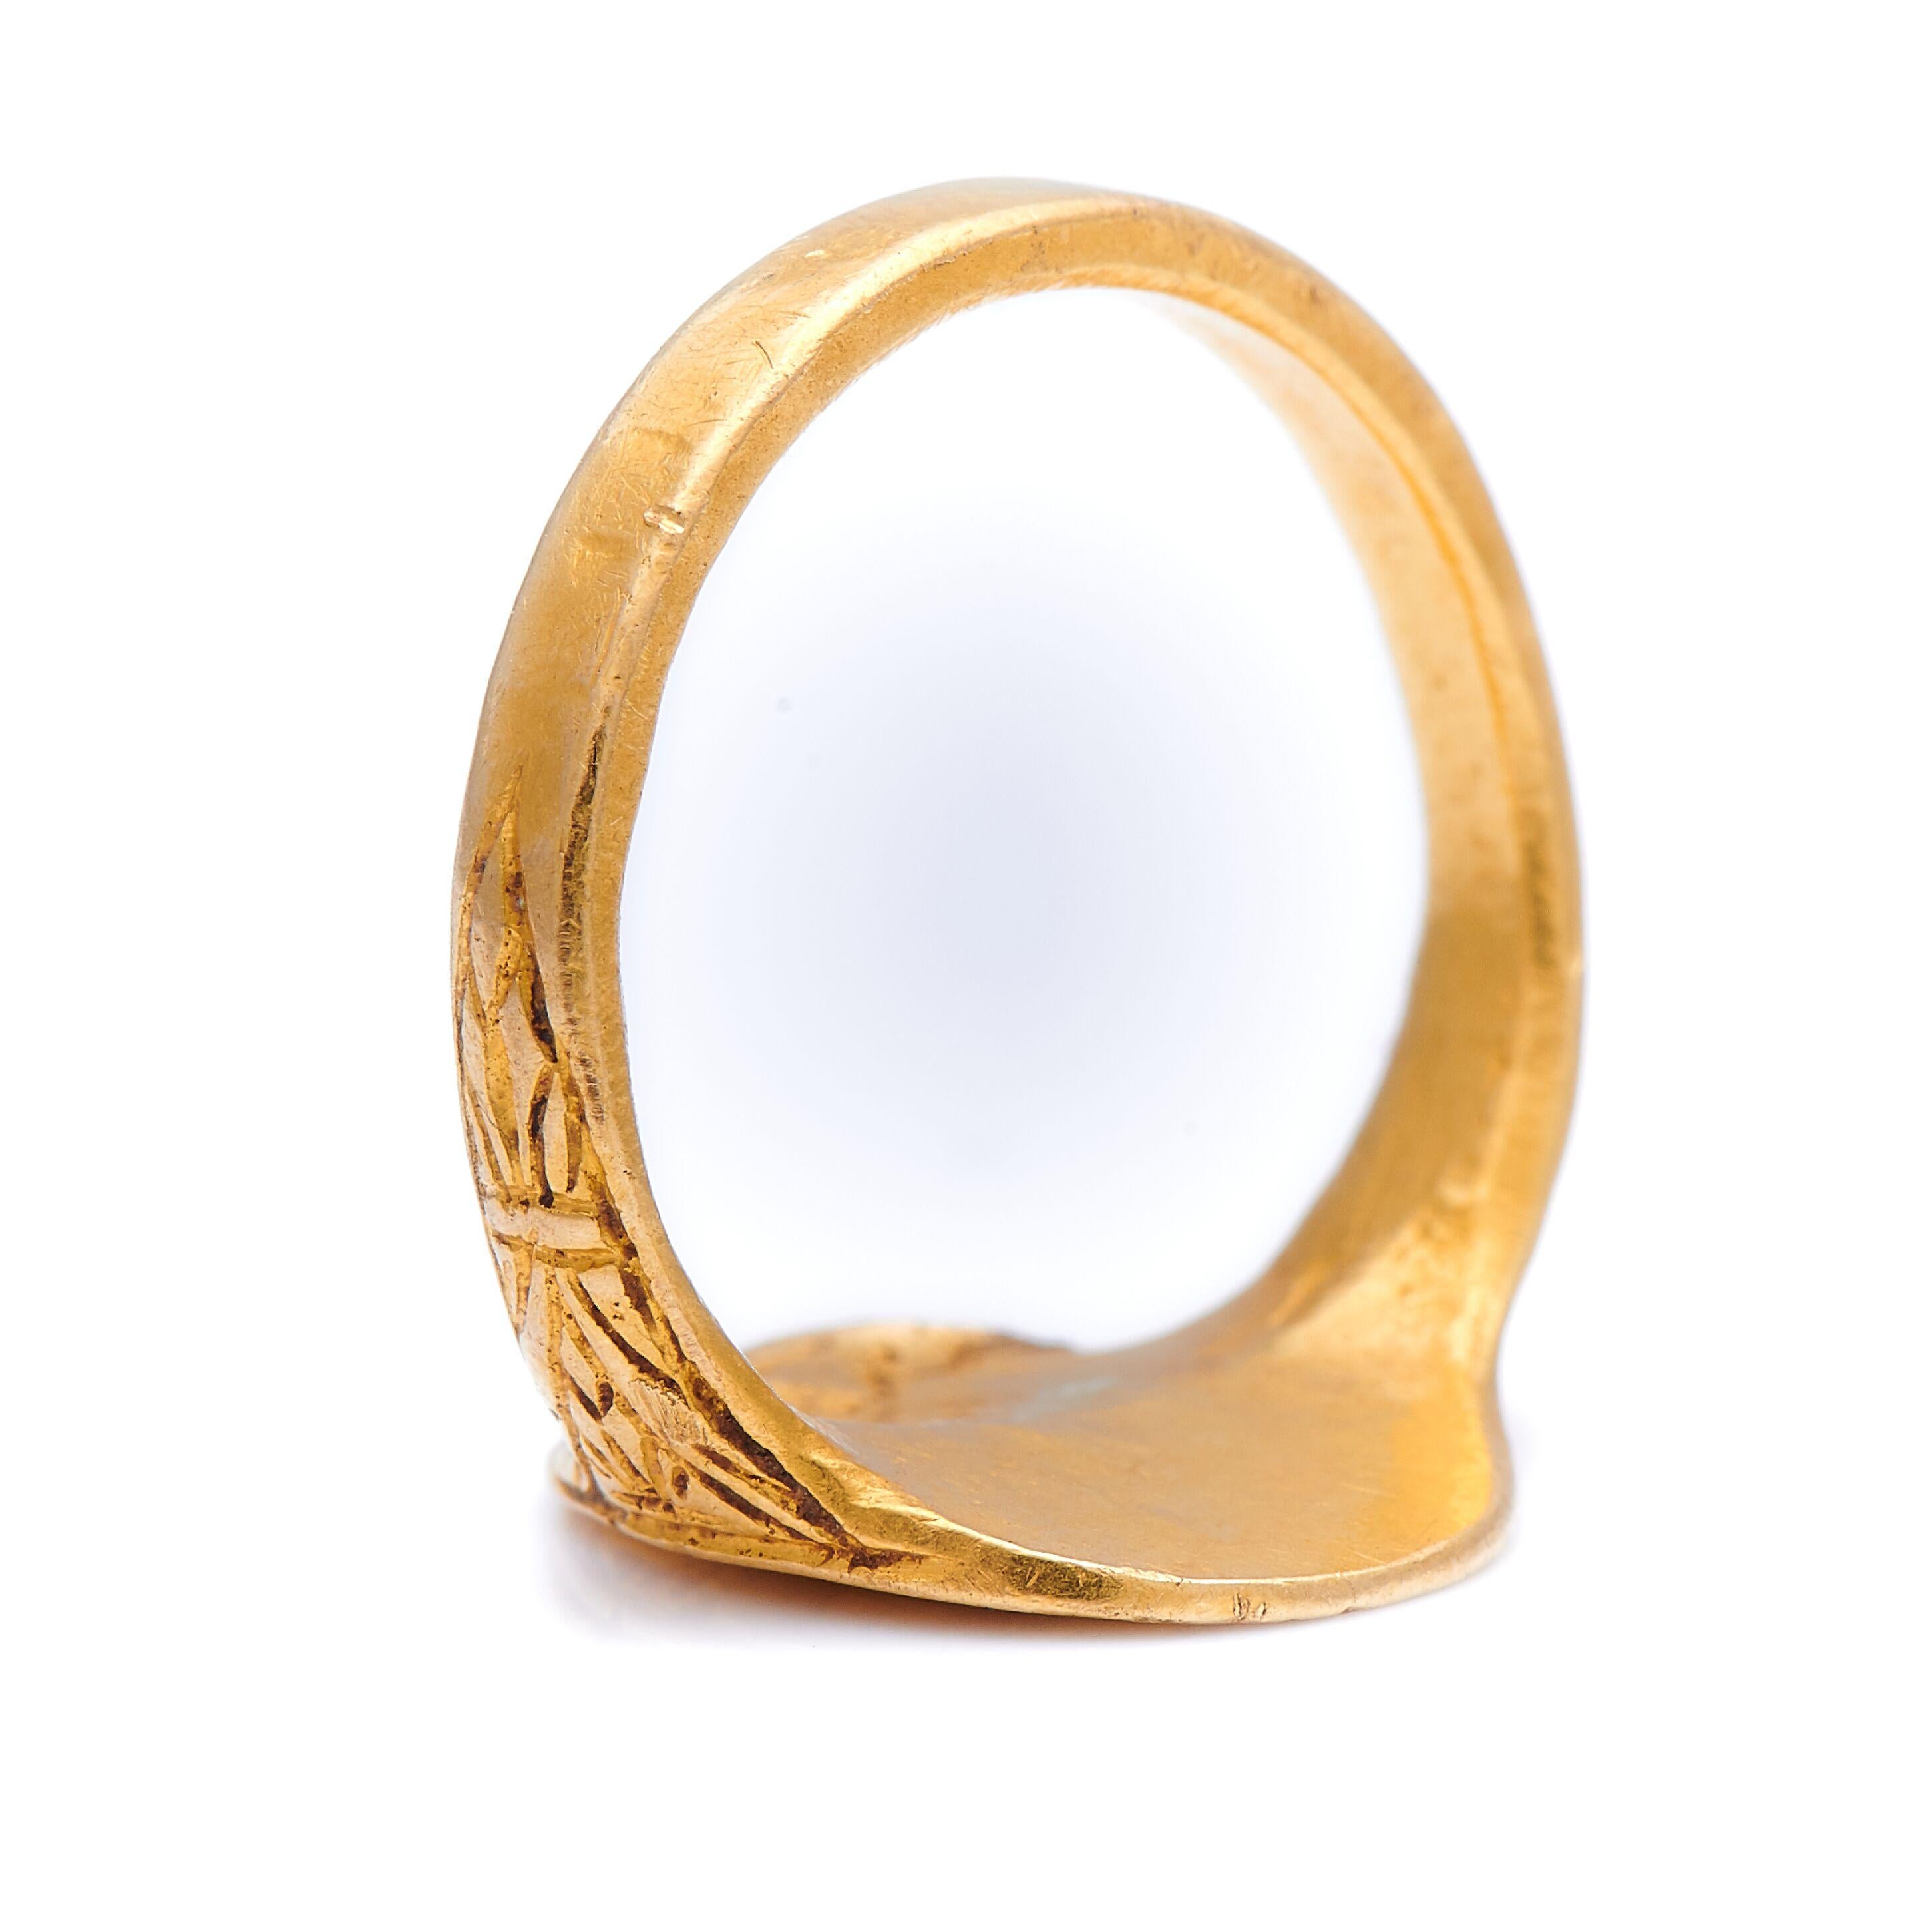 Women's or Men's Rare, Early, 17th Century Gold, Signet Ring